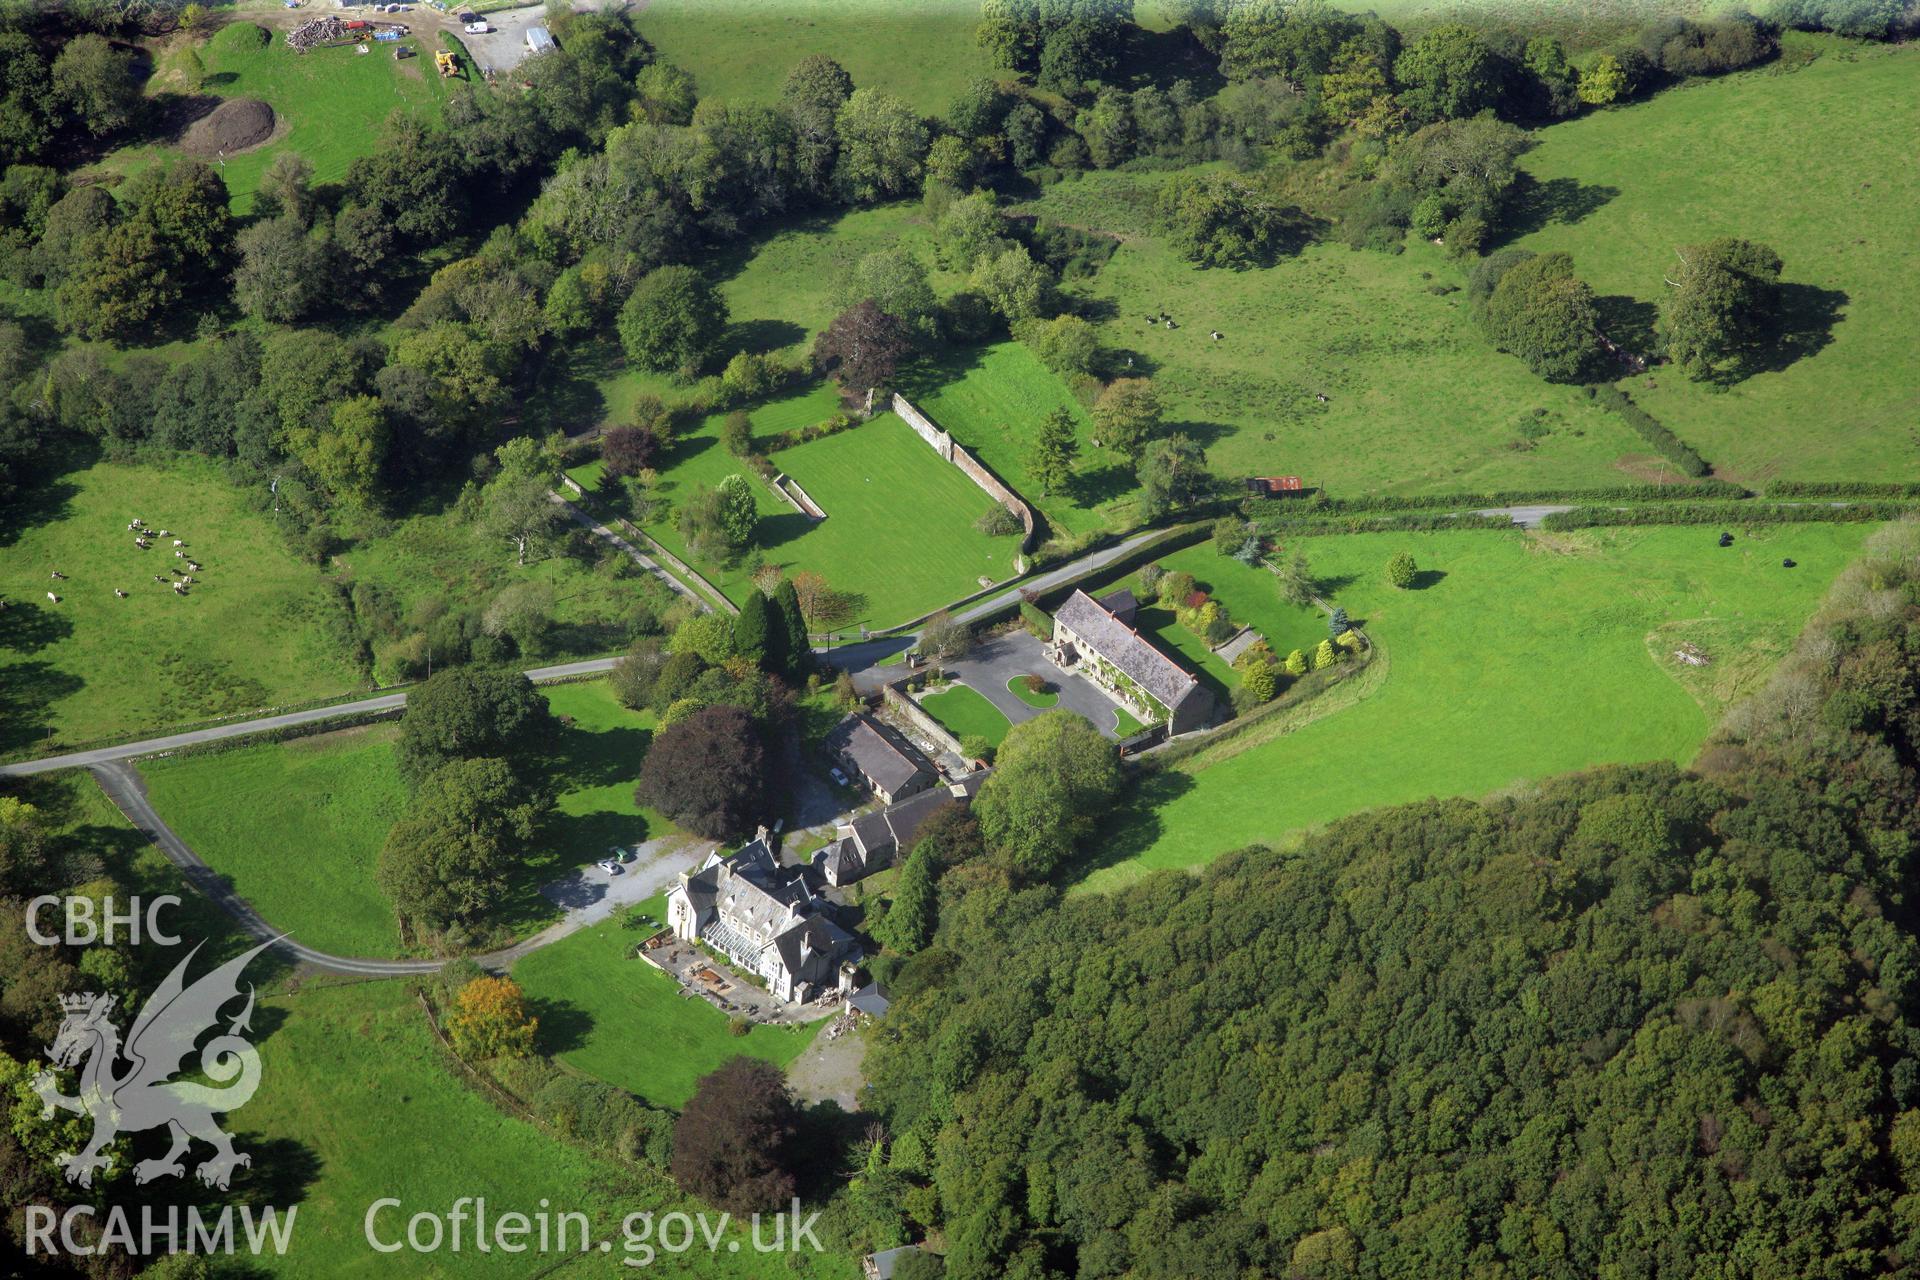 RCAHMW colour oblique photograph of Whitland Abbey and Gardens. Taken by Toby Driver and Oliver Davies on 28/09/2011.